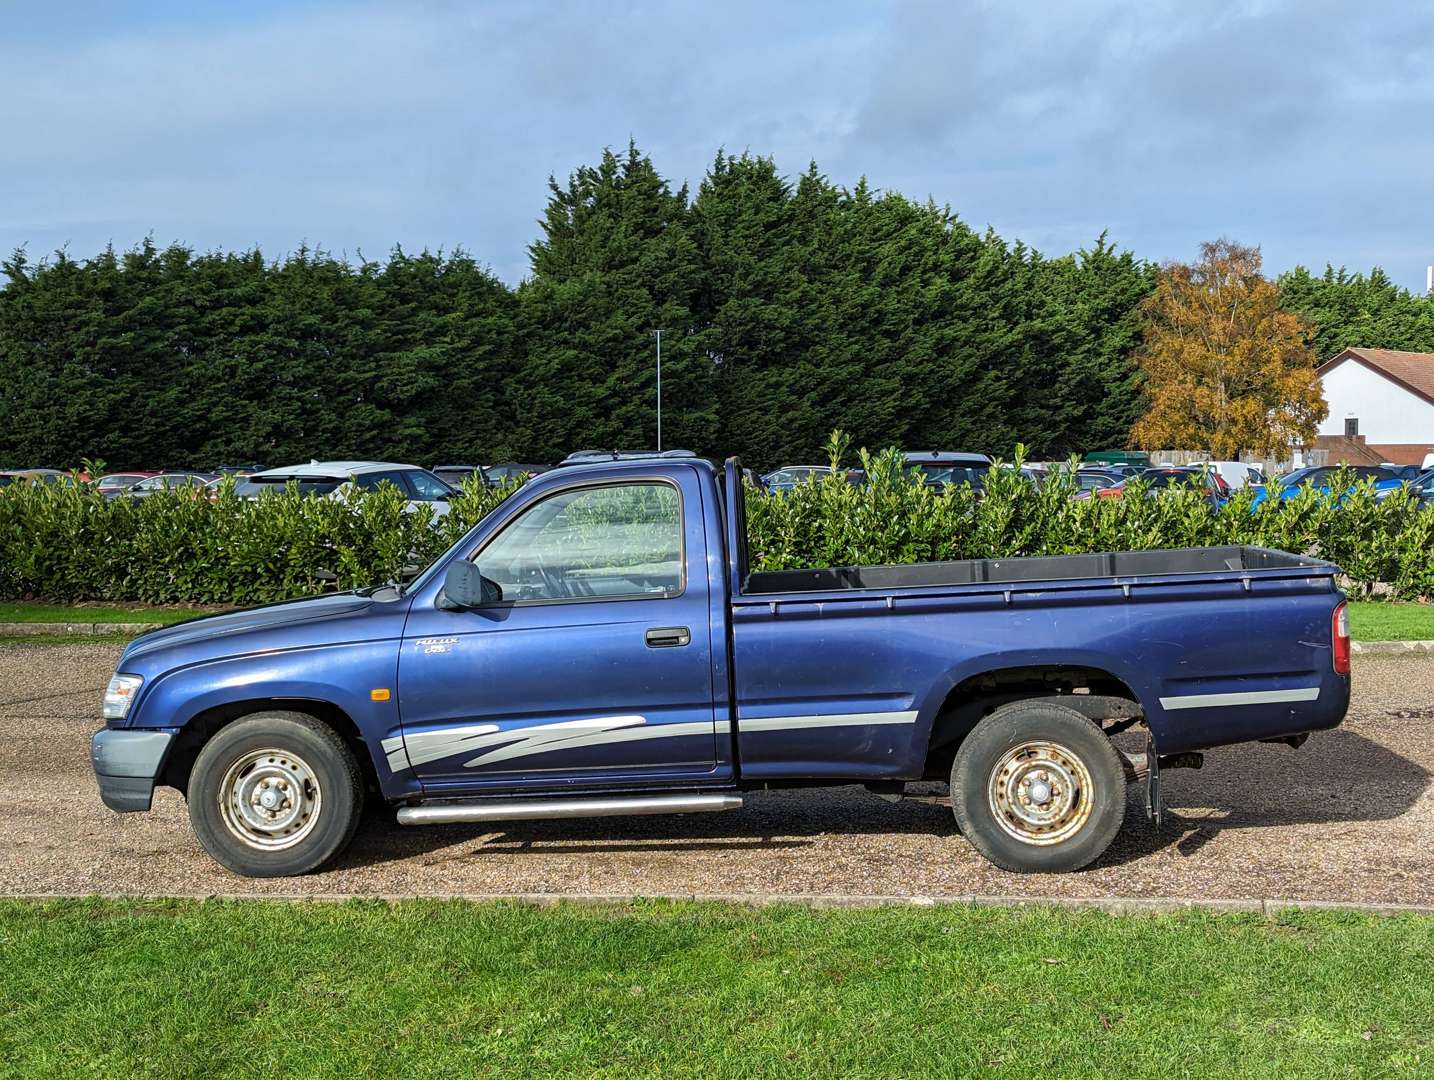 <p>2002 TOYOTA HILUX 2WD PICK-UP</p>